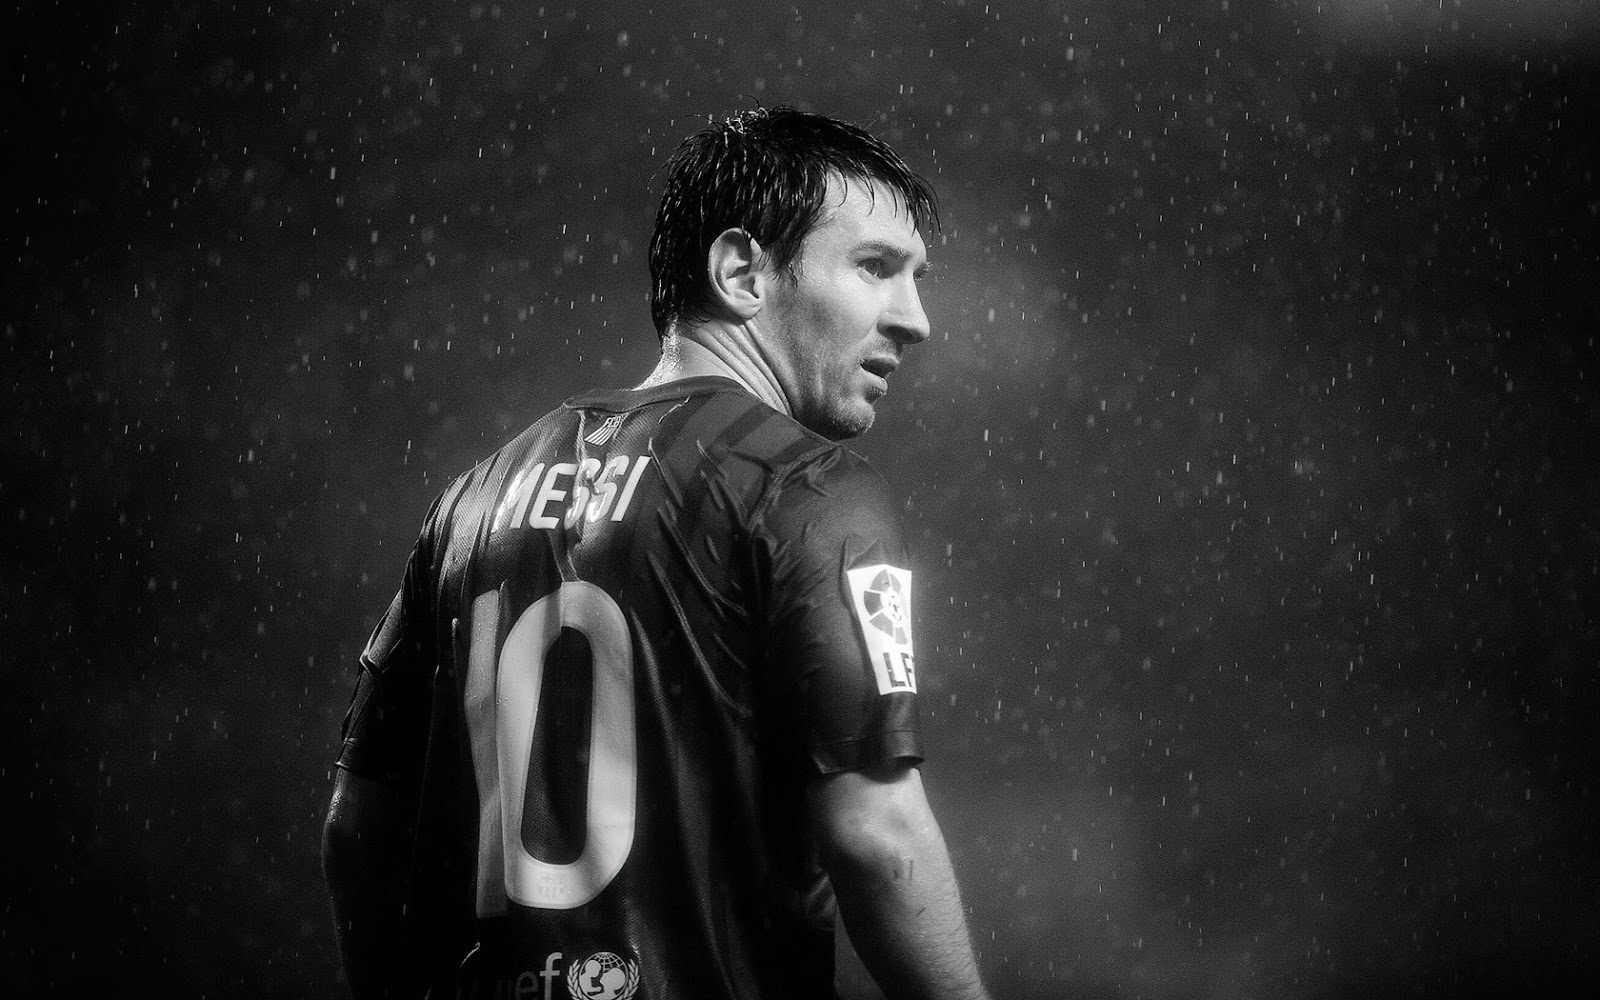 ALL SPORTS PLAYERS: Lionel Messi hd Wallpapers 2014 Fifa 